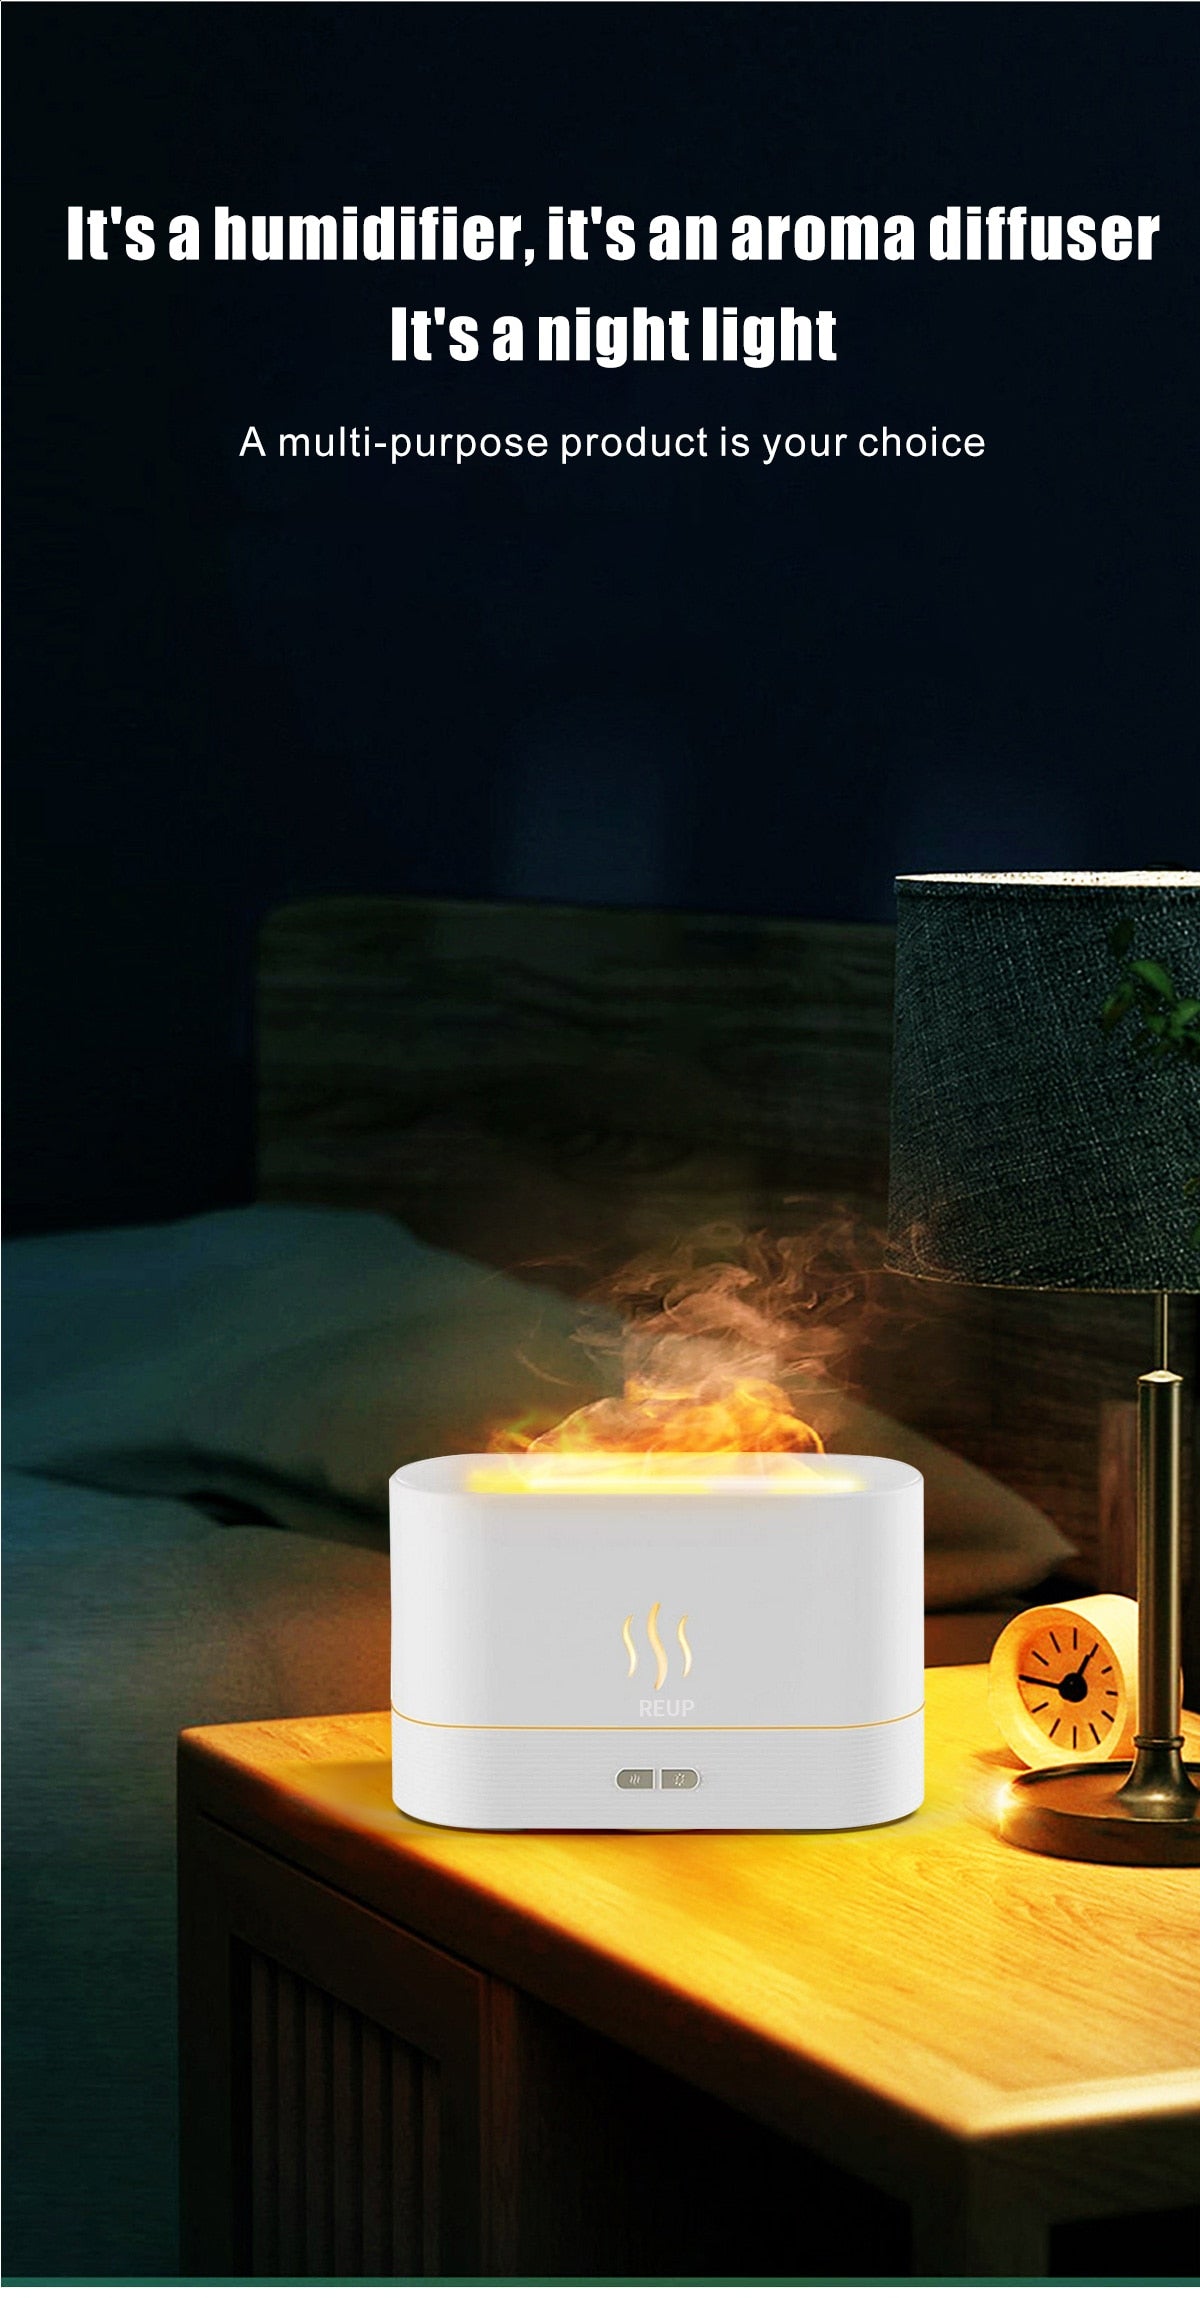 The Tranquil Flame - a Noiseless Aroma Diffuser and Humidifier